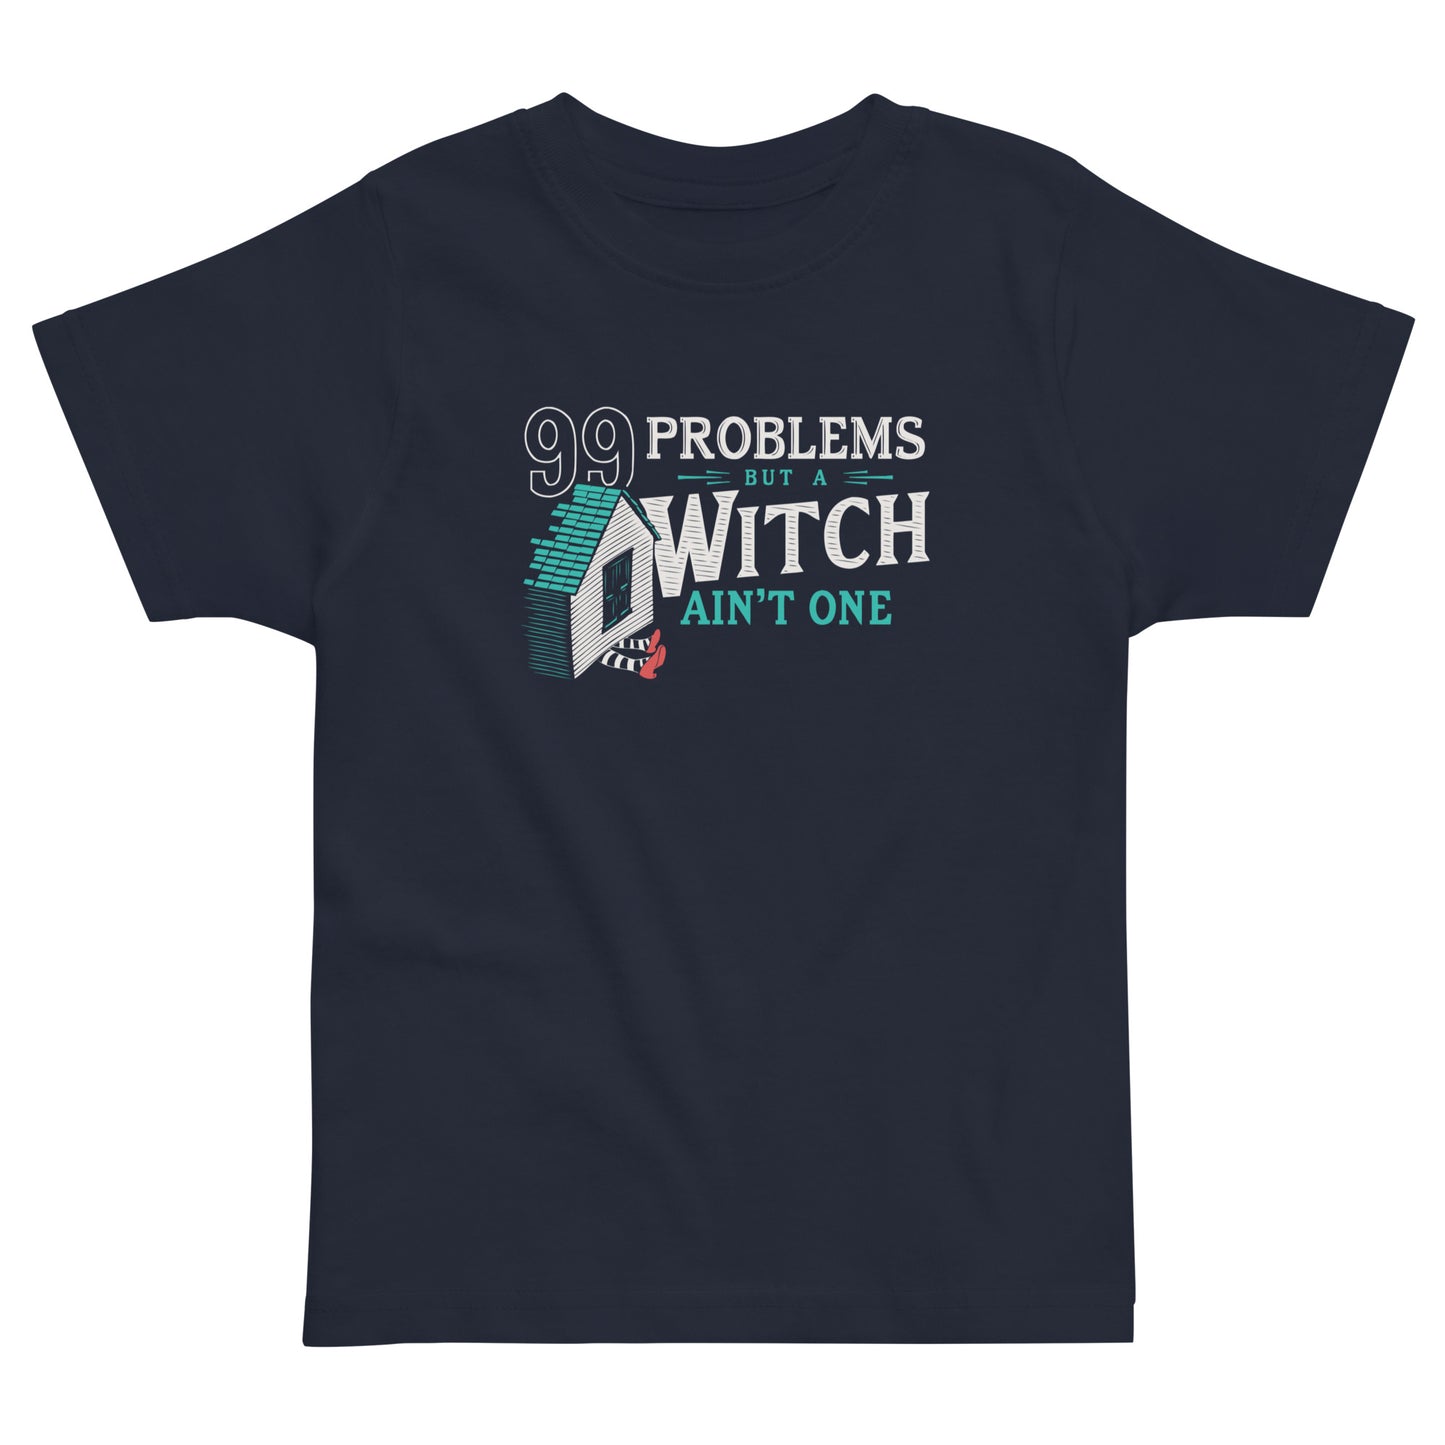 99 Problems But A Witch Ain't One Kid's Toddler Tee